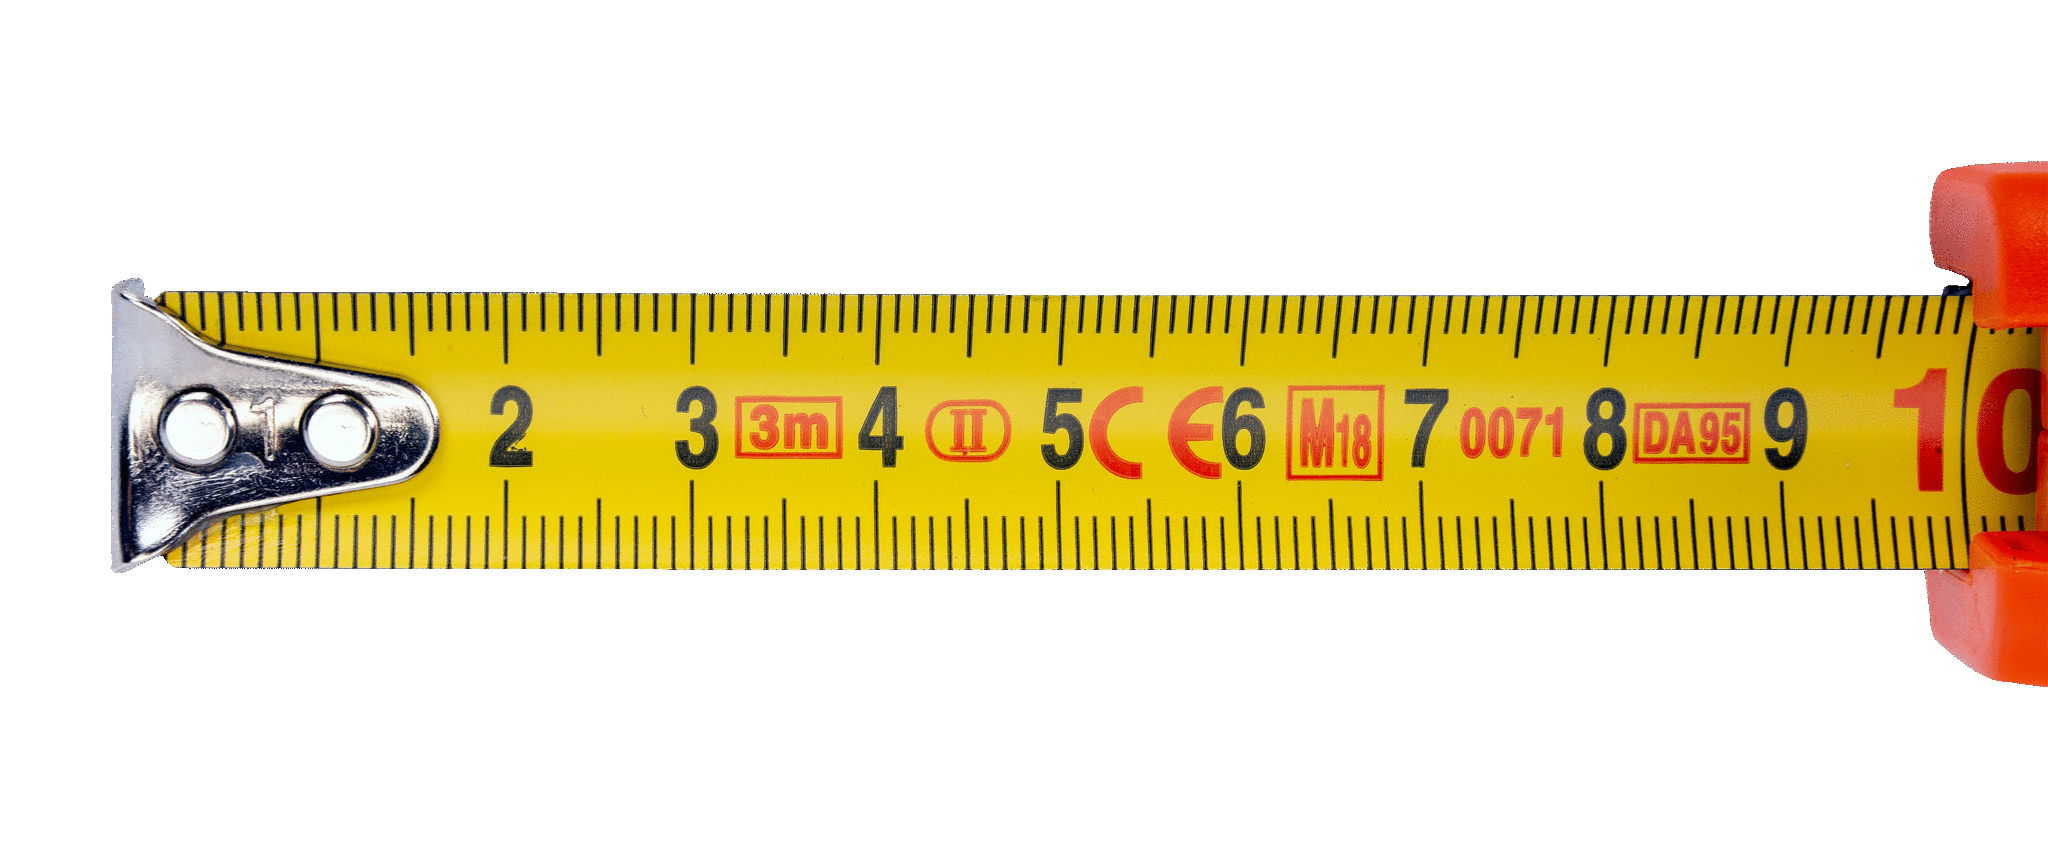 Short Measuring Tapes with Positive Locking Button - MTG-5-19 by Bahco